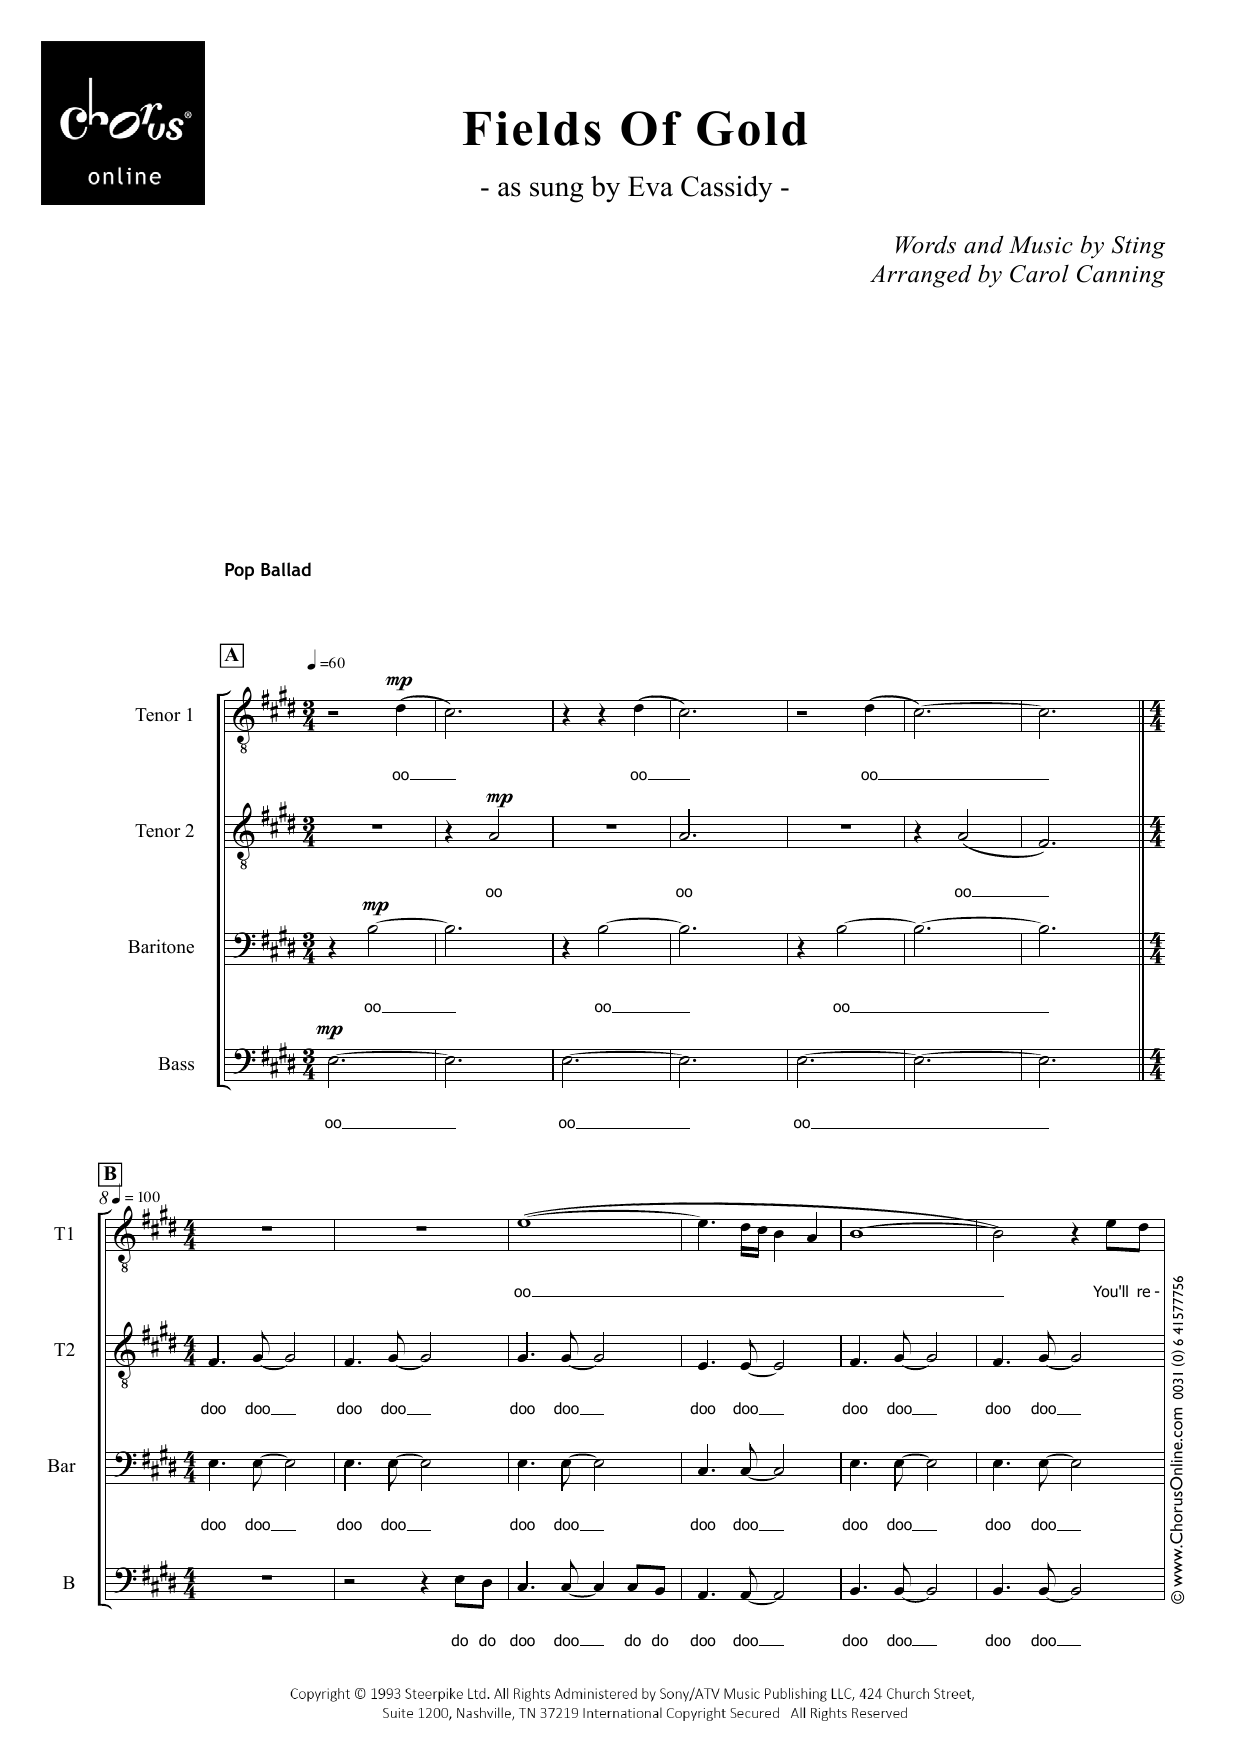 Eva Cassidy Fields Of Gold (arr. Carol Canning) sheet music notes printable PDF score